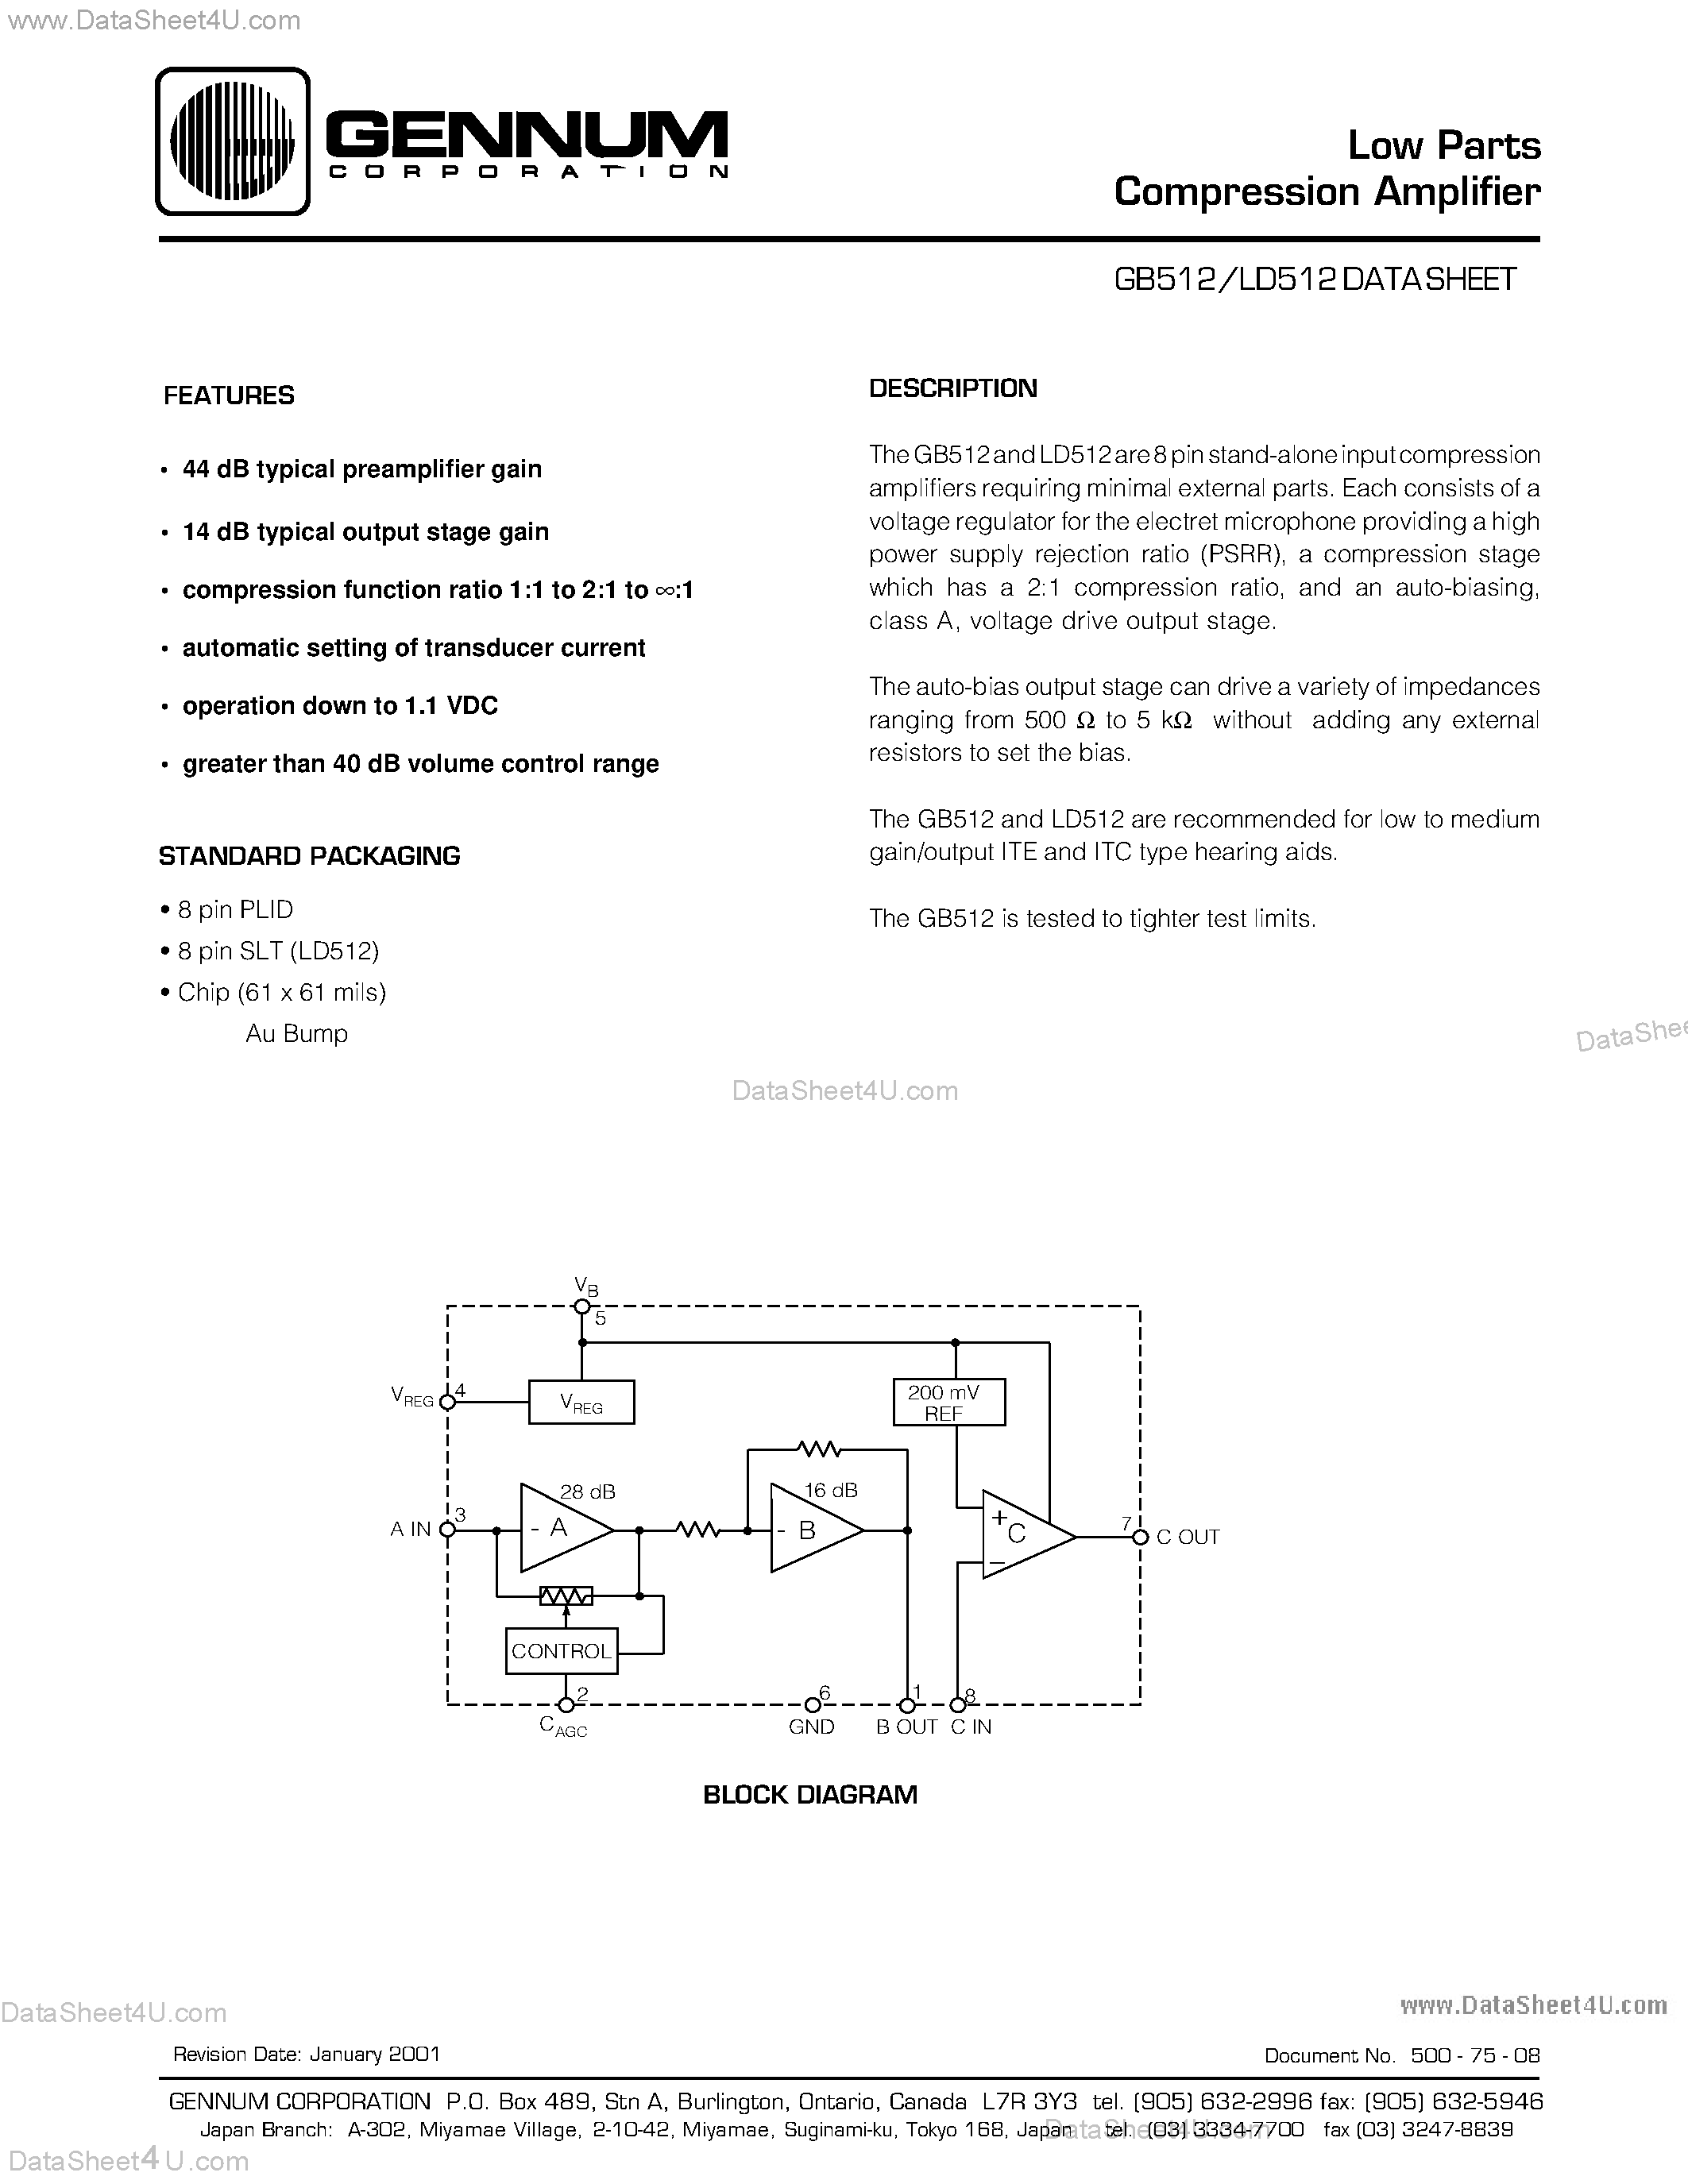 Datasheet LD512 - Low Parts Compression Amplifier page 1